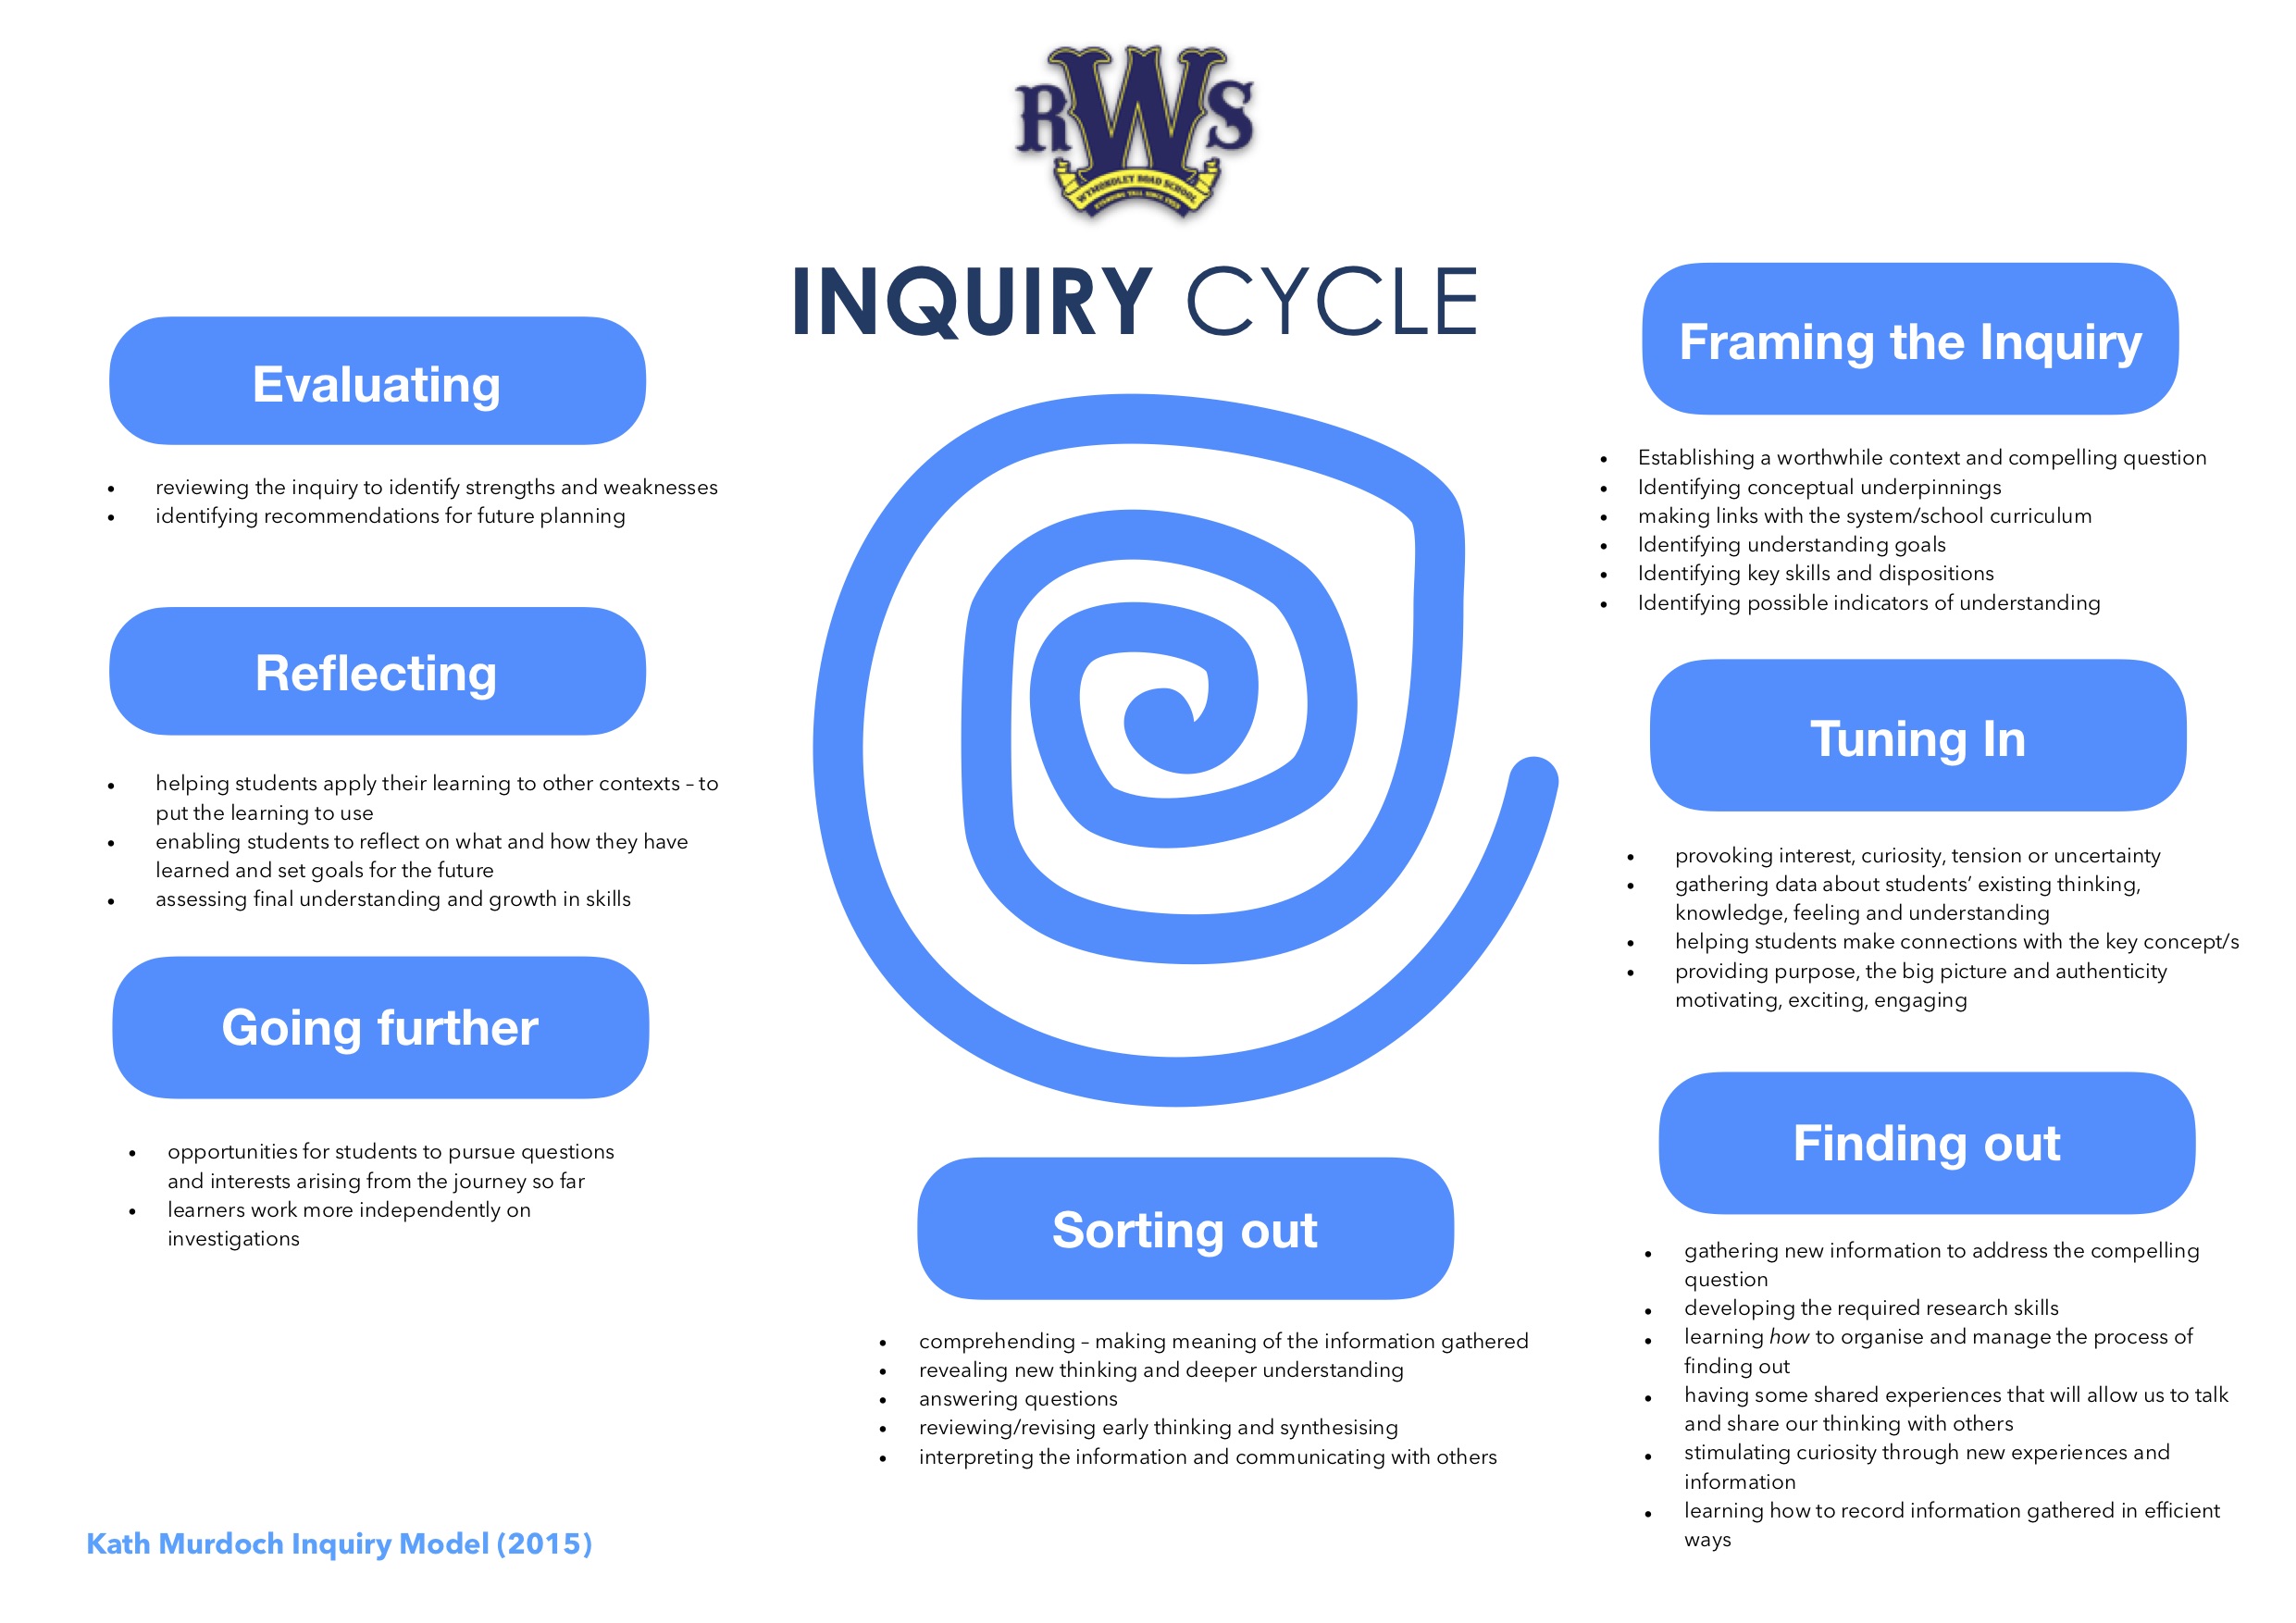 the Inquiry Cycle in Wymondley